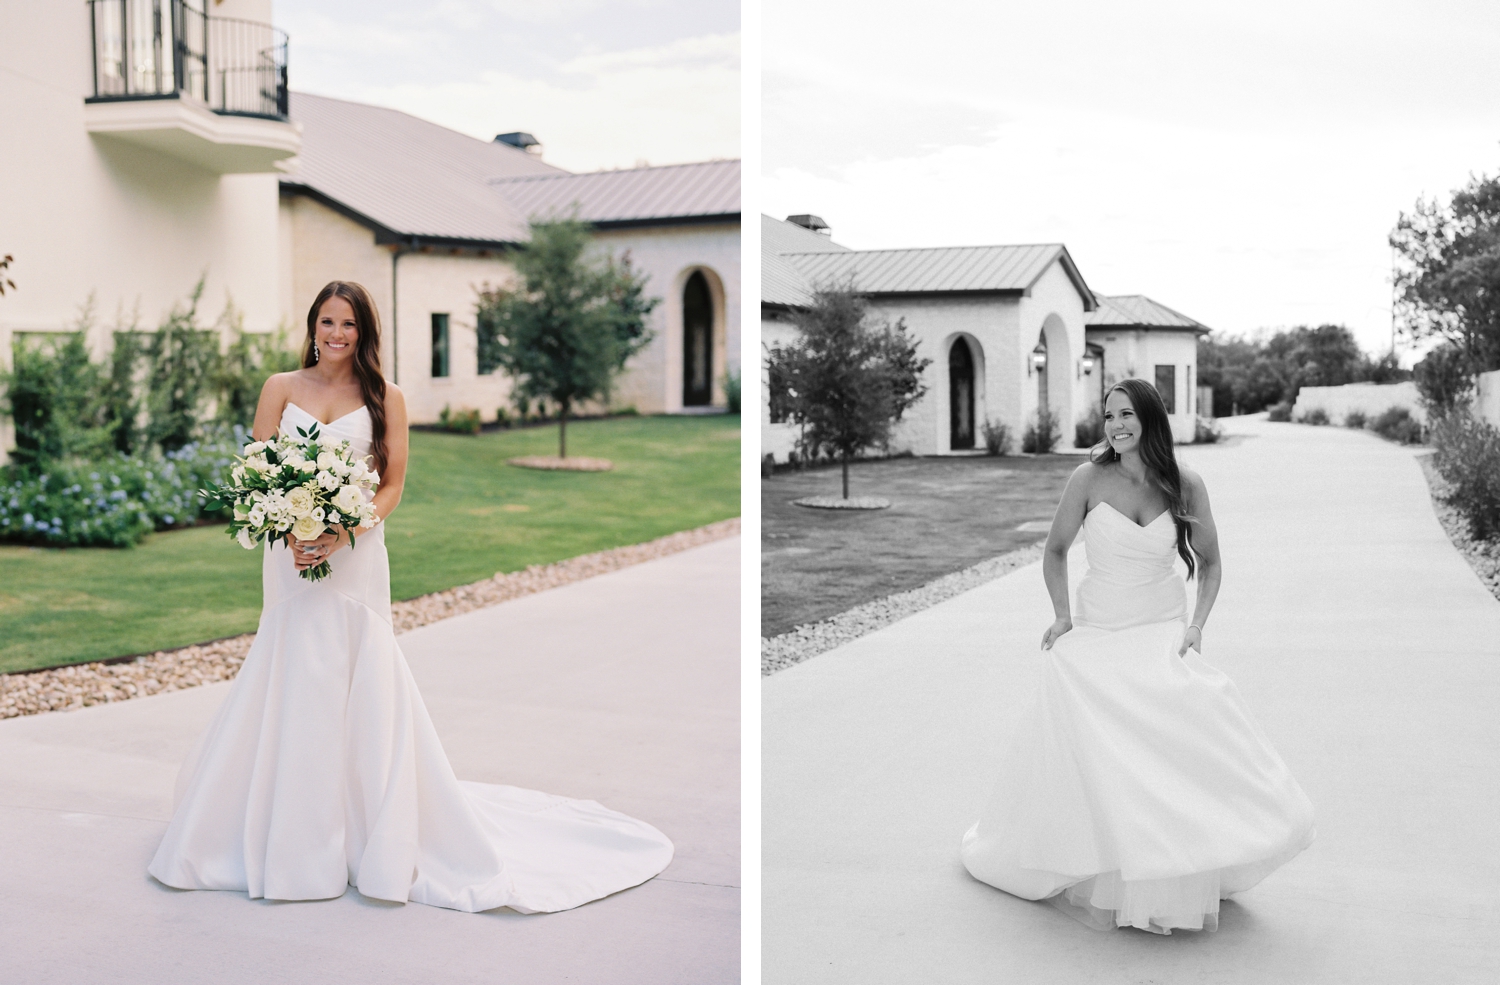 Classic wedding day details at an all-white wedding in the Texas Hill Country | The Preserve at Canyon Lake